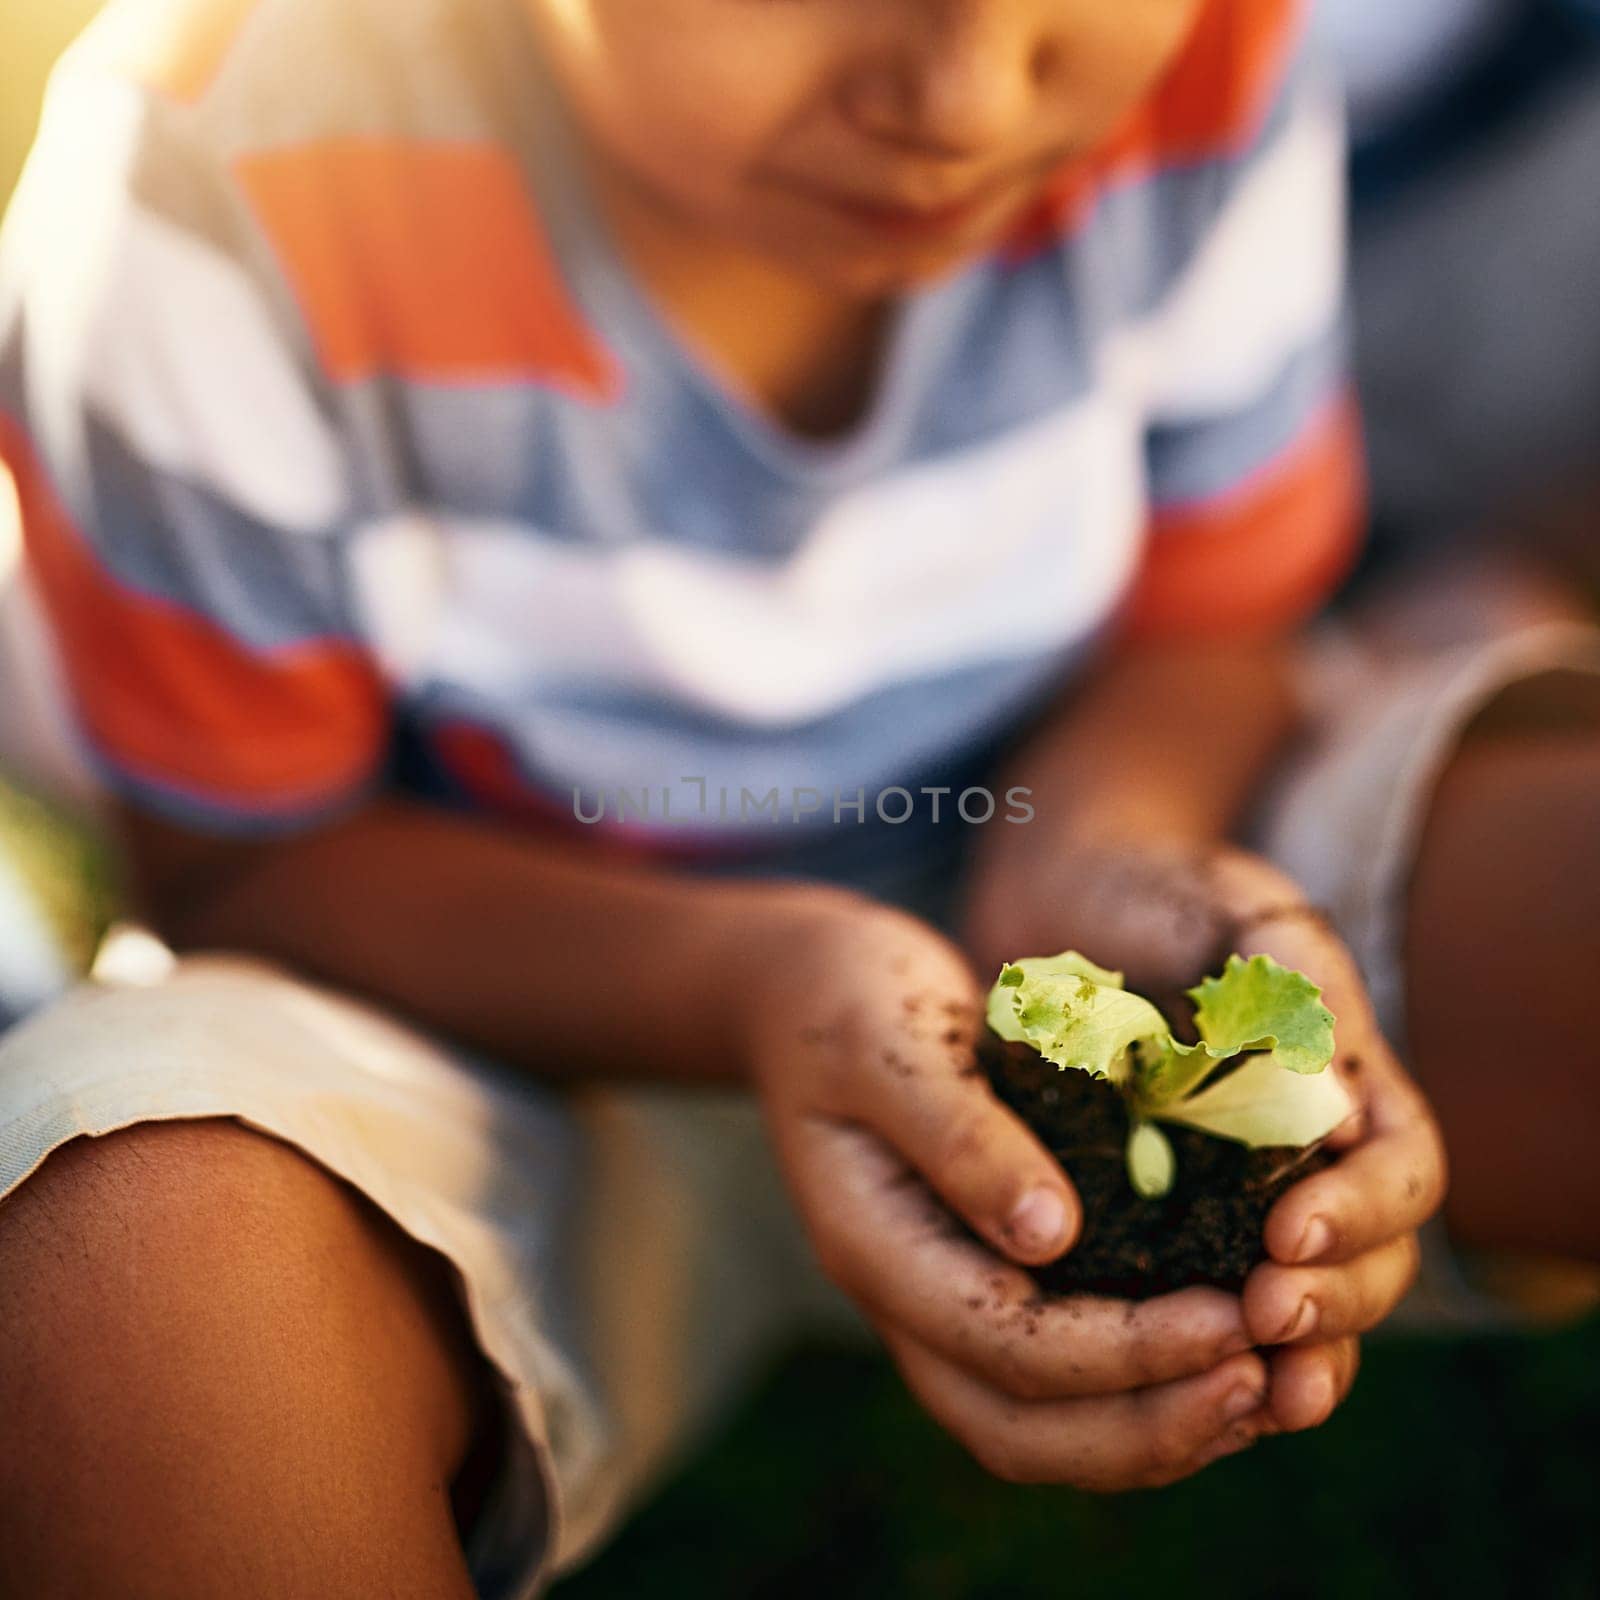 Hands of child, soil or plant in garden for sustainability, agriculture care or farming development. Backyard, natural growth or closeup of blurry kid hand holding sand or planting for learning agro.